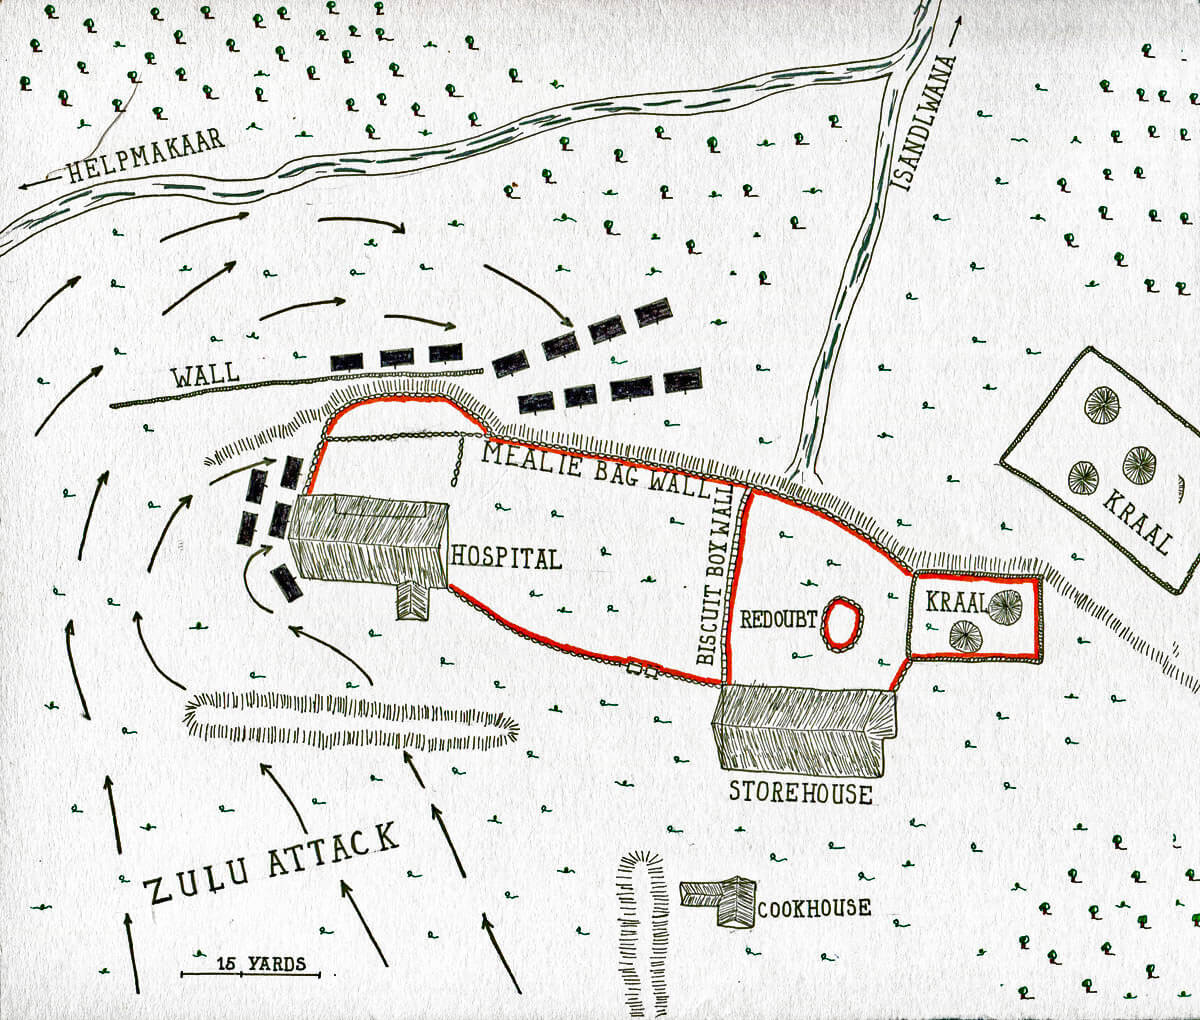 Map of the Battle of Rorke's Drift on 22nd January 1879 in the Zulu War: map by John Fawkes